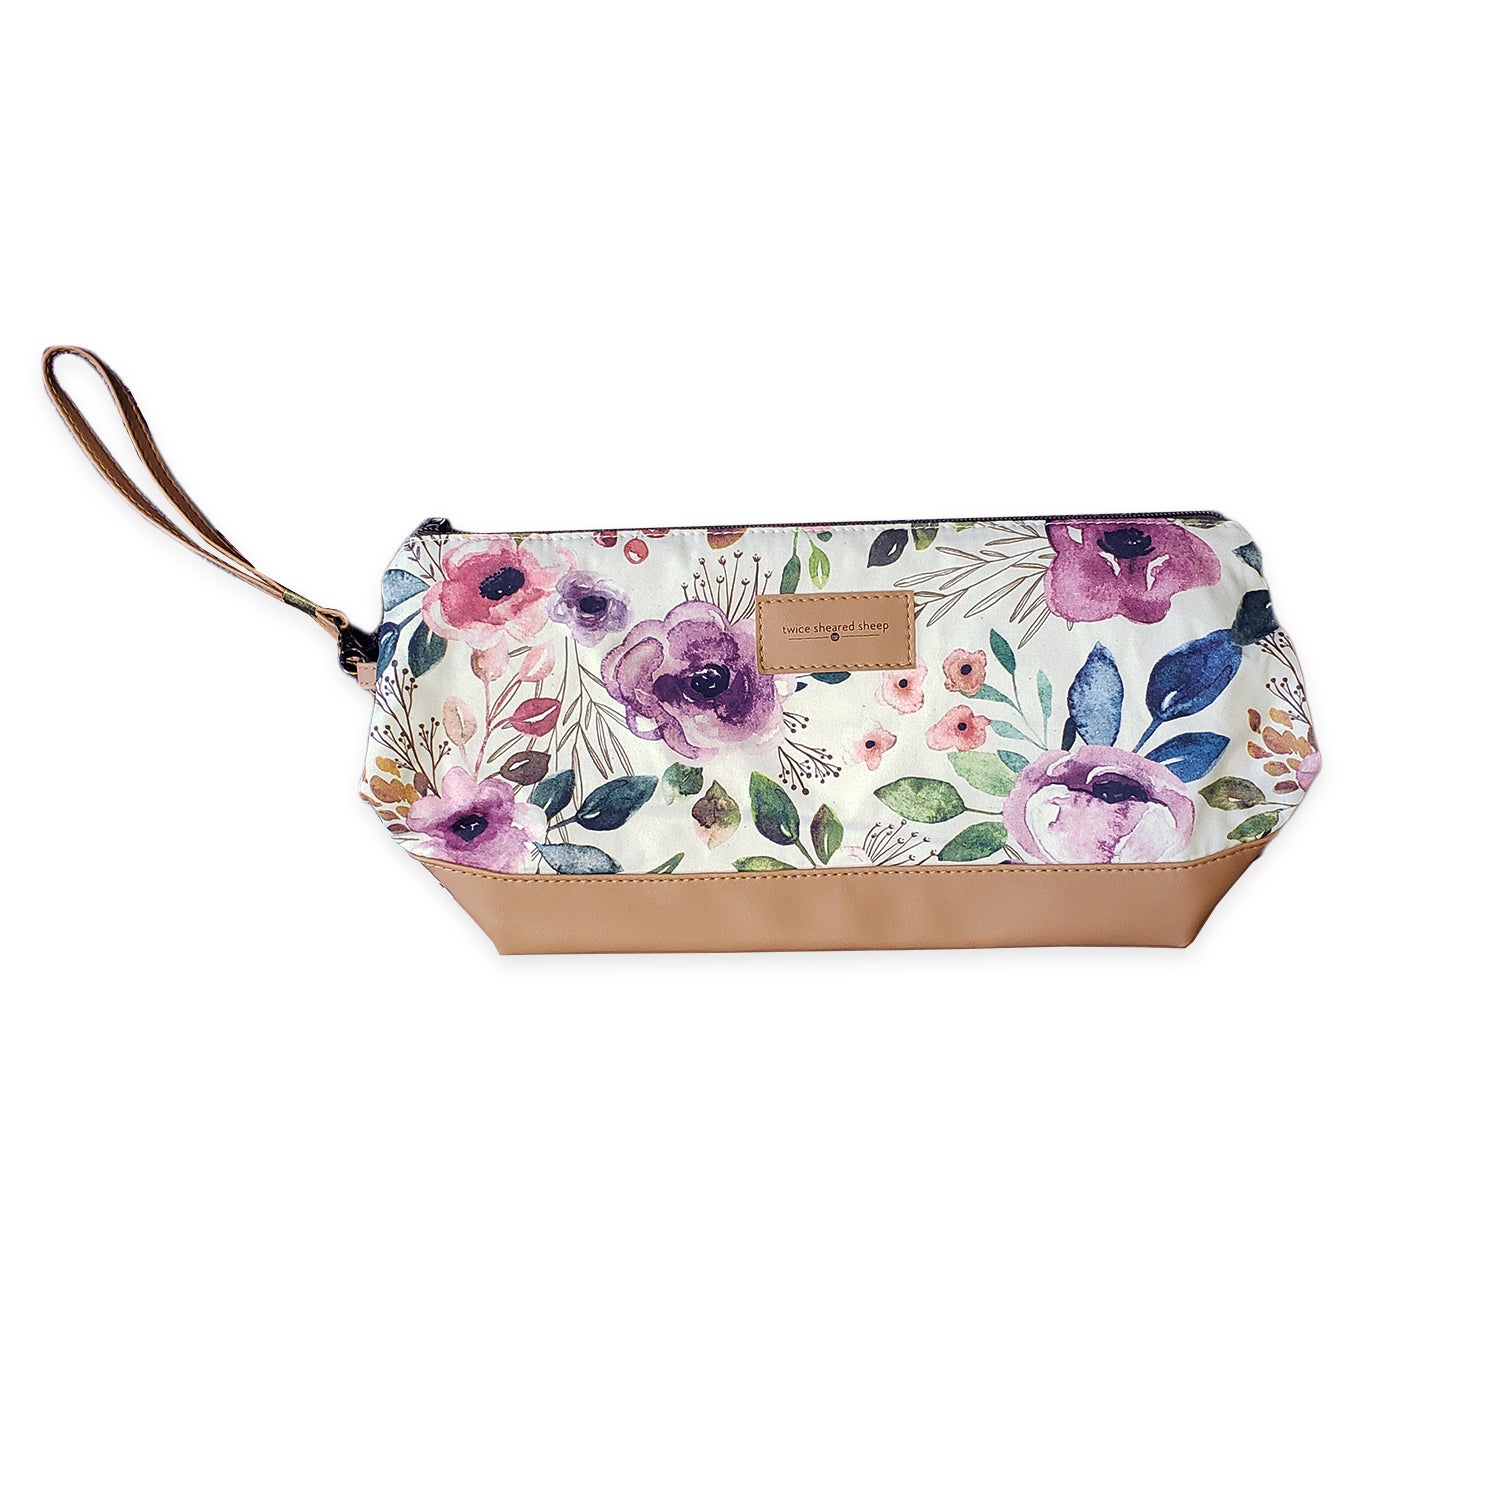 PRE-ORDER - Spring Floral Trinity Bag – Small Zippered Knitting Project Bag - Shipping in early June